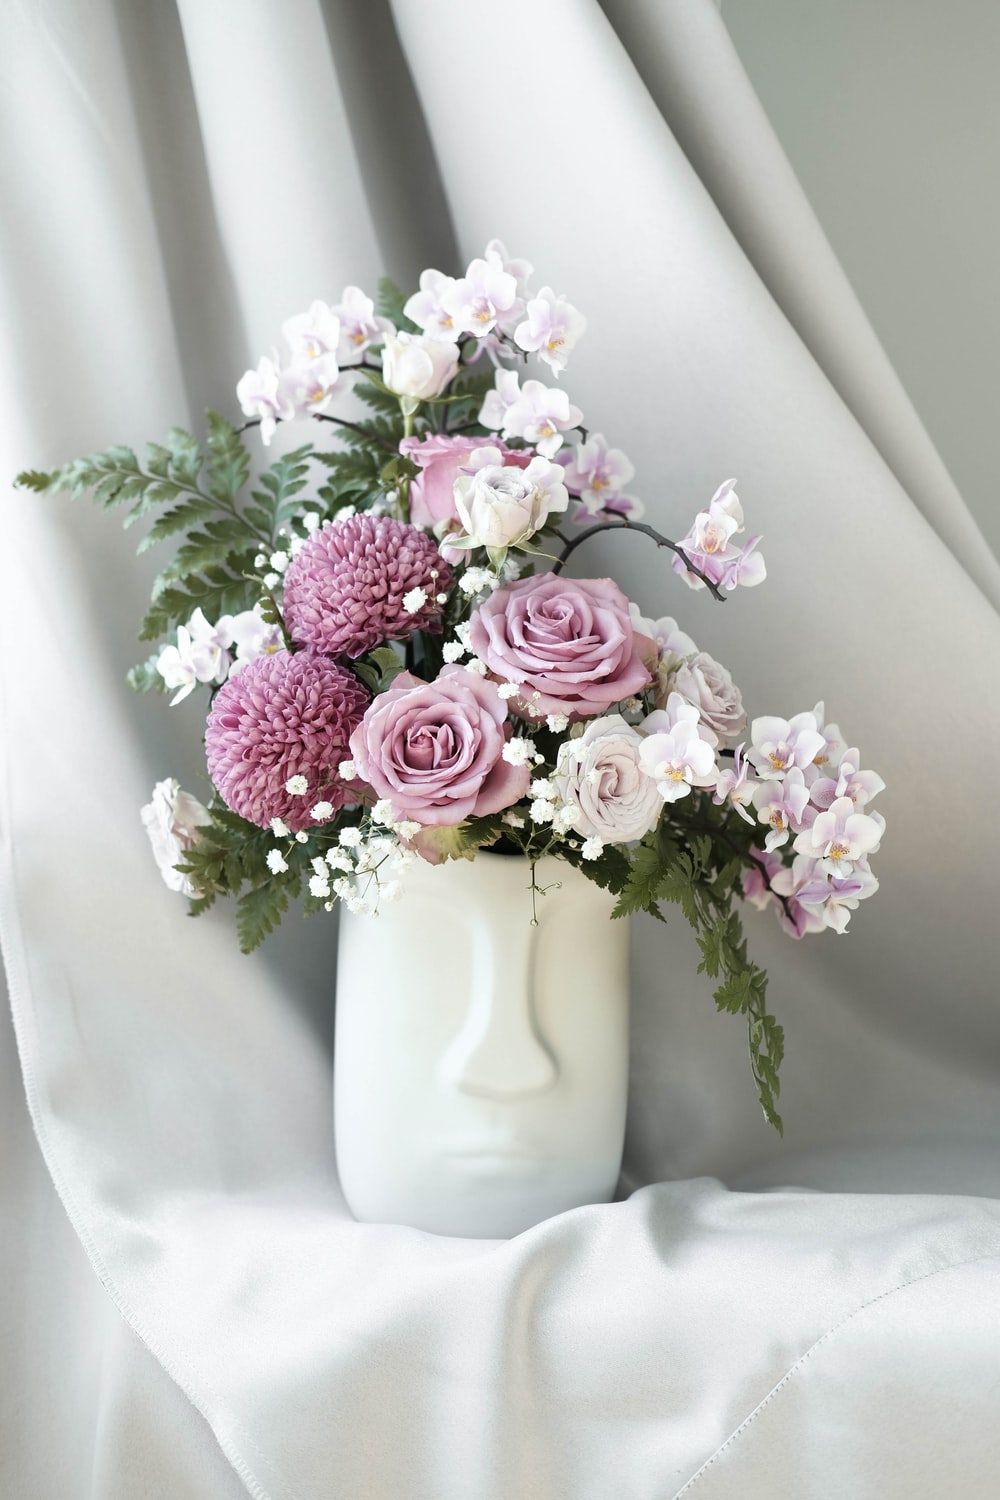 Flower Vase Picture [HD]. Download Free Image